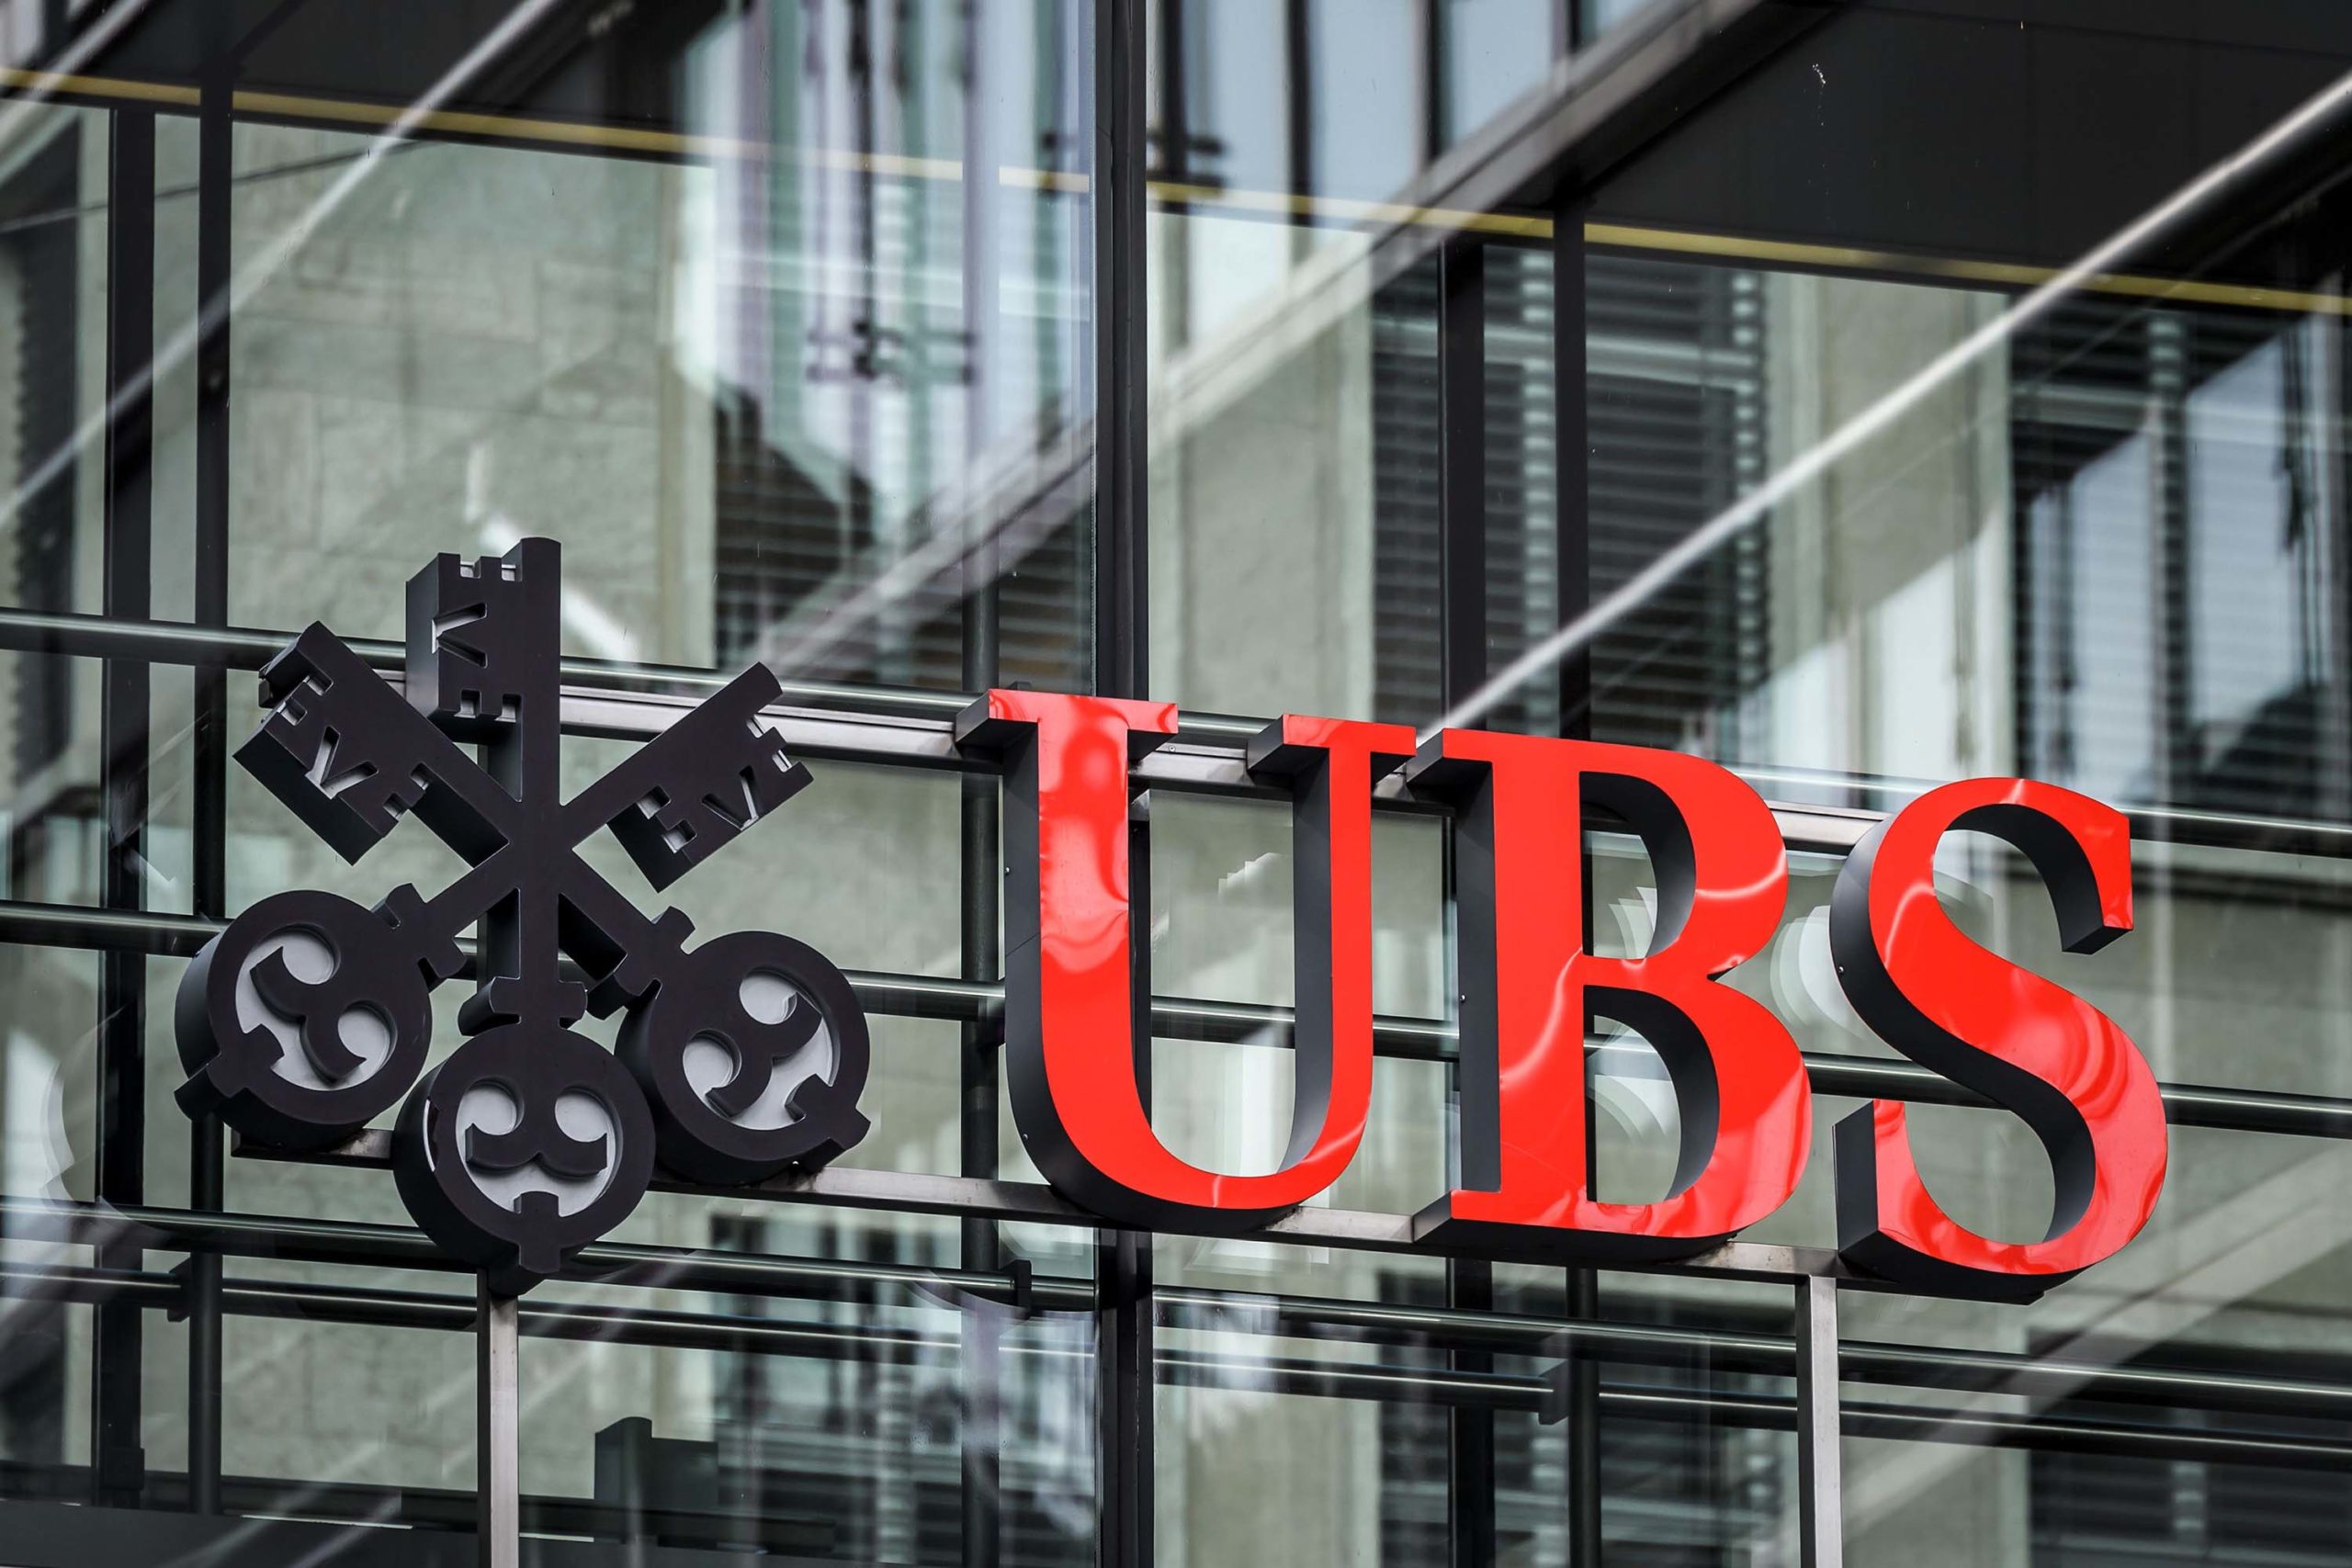 ubs wants to offer cryptocurrency services to its wealthy customers